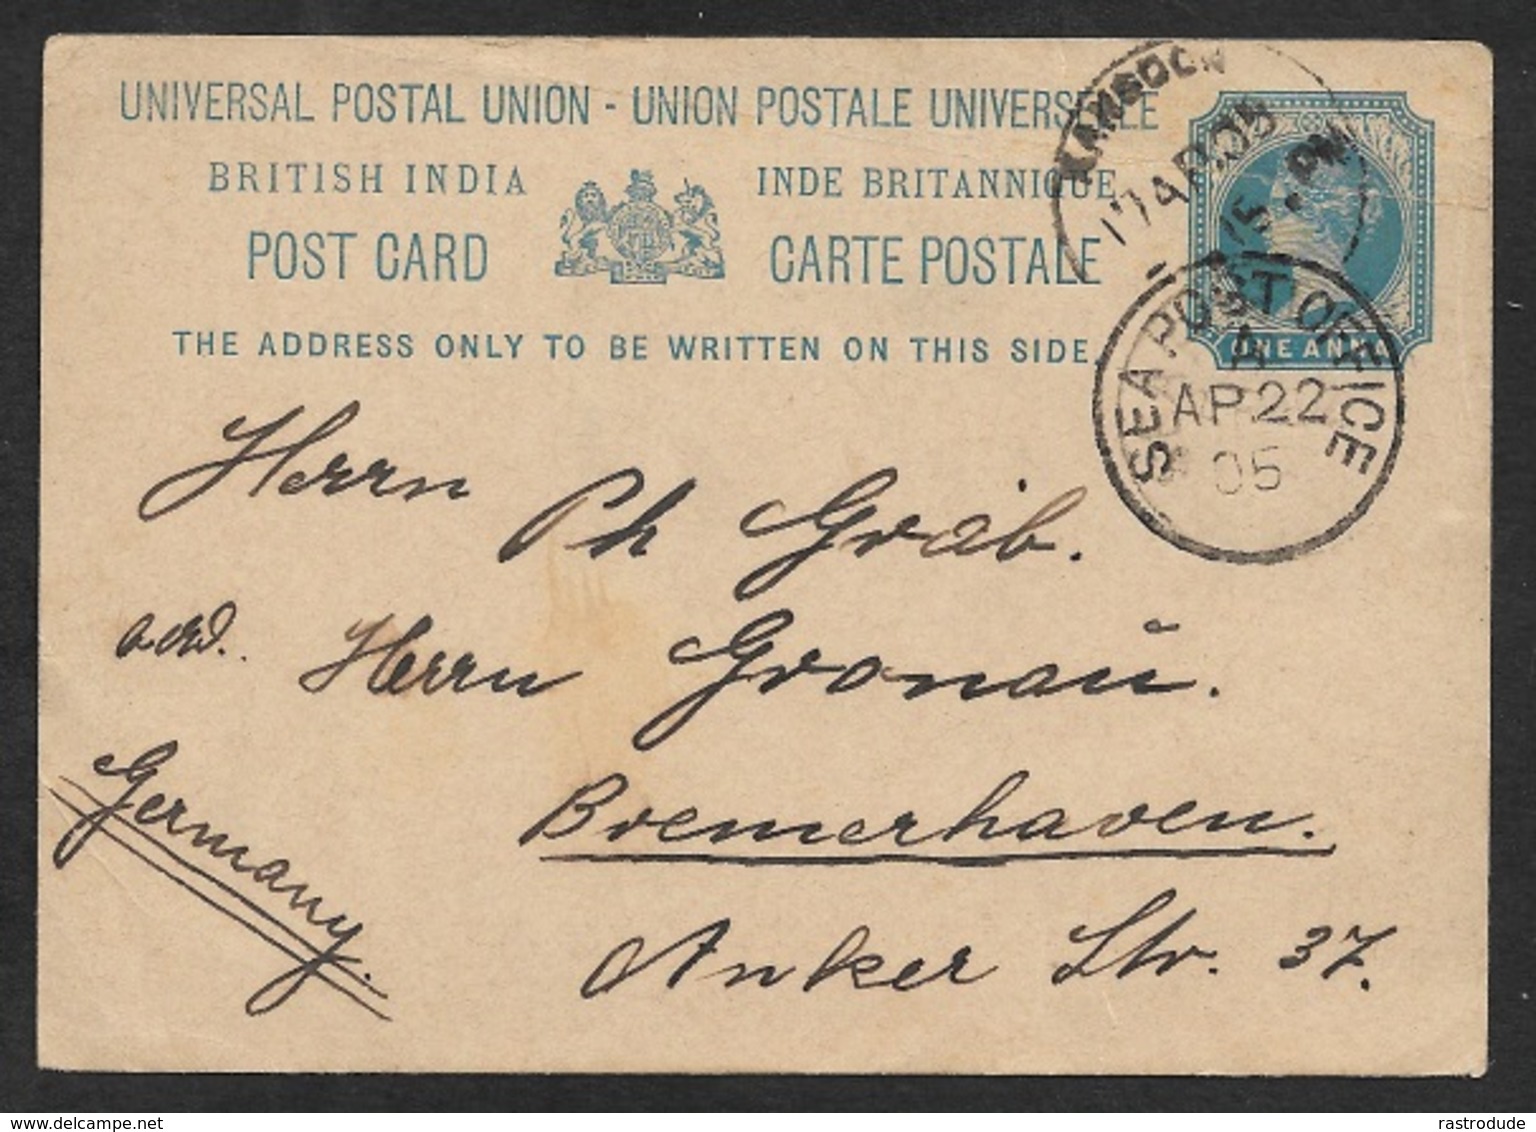 1905 - INDIA - 1A PSC Used In RANGOON, BURMA (MYANMAR) To BREMERHAVEN, GERMANY - 1882-1901 Empire